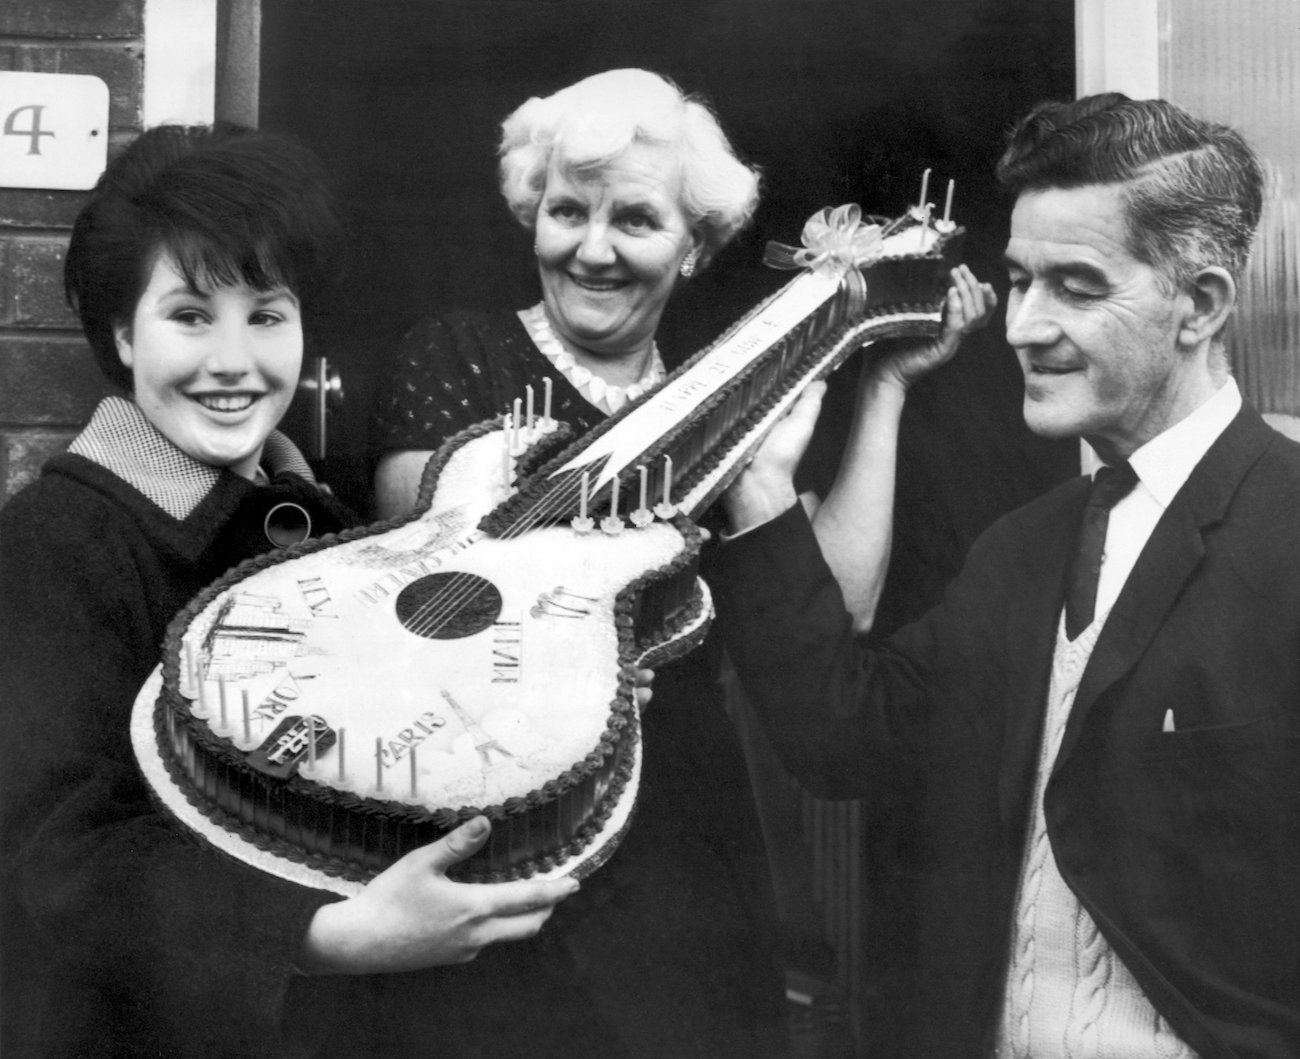 George Harrison's parents, Harold and Louise, receiving a birthday cake from a fan in 1964.